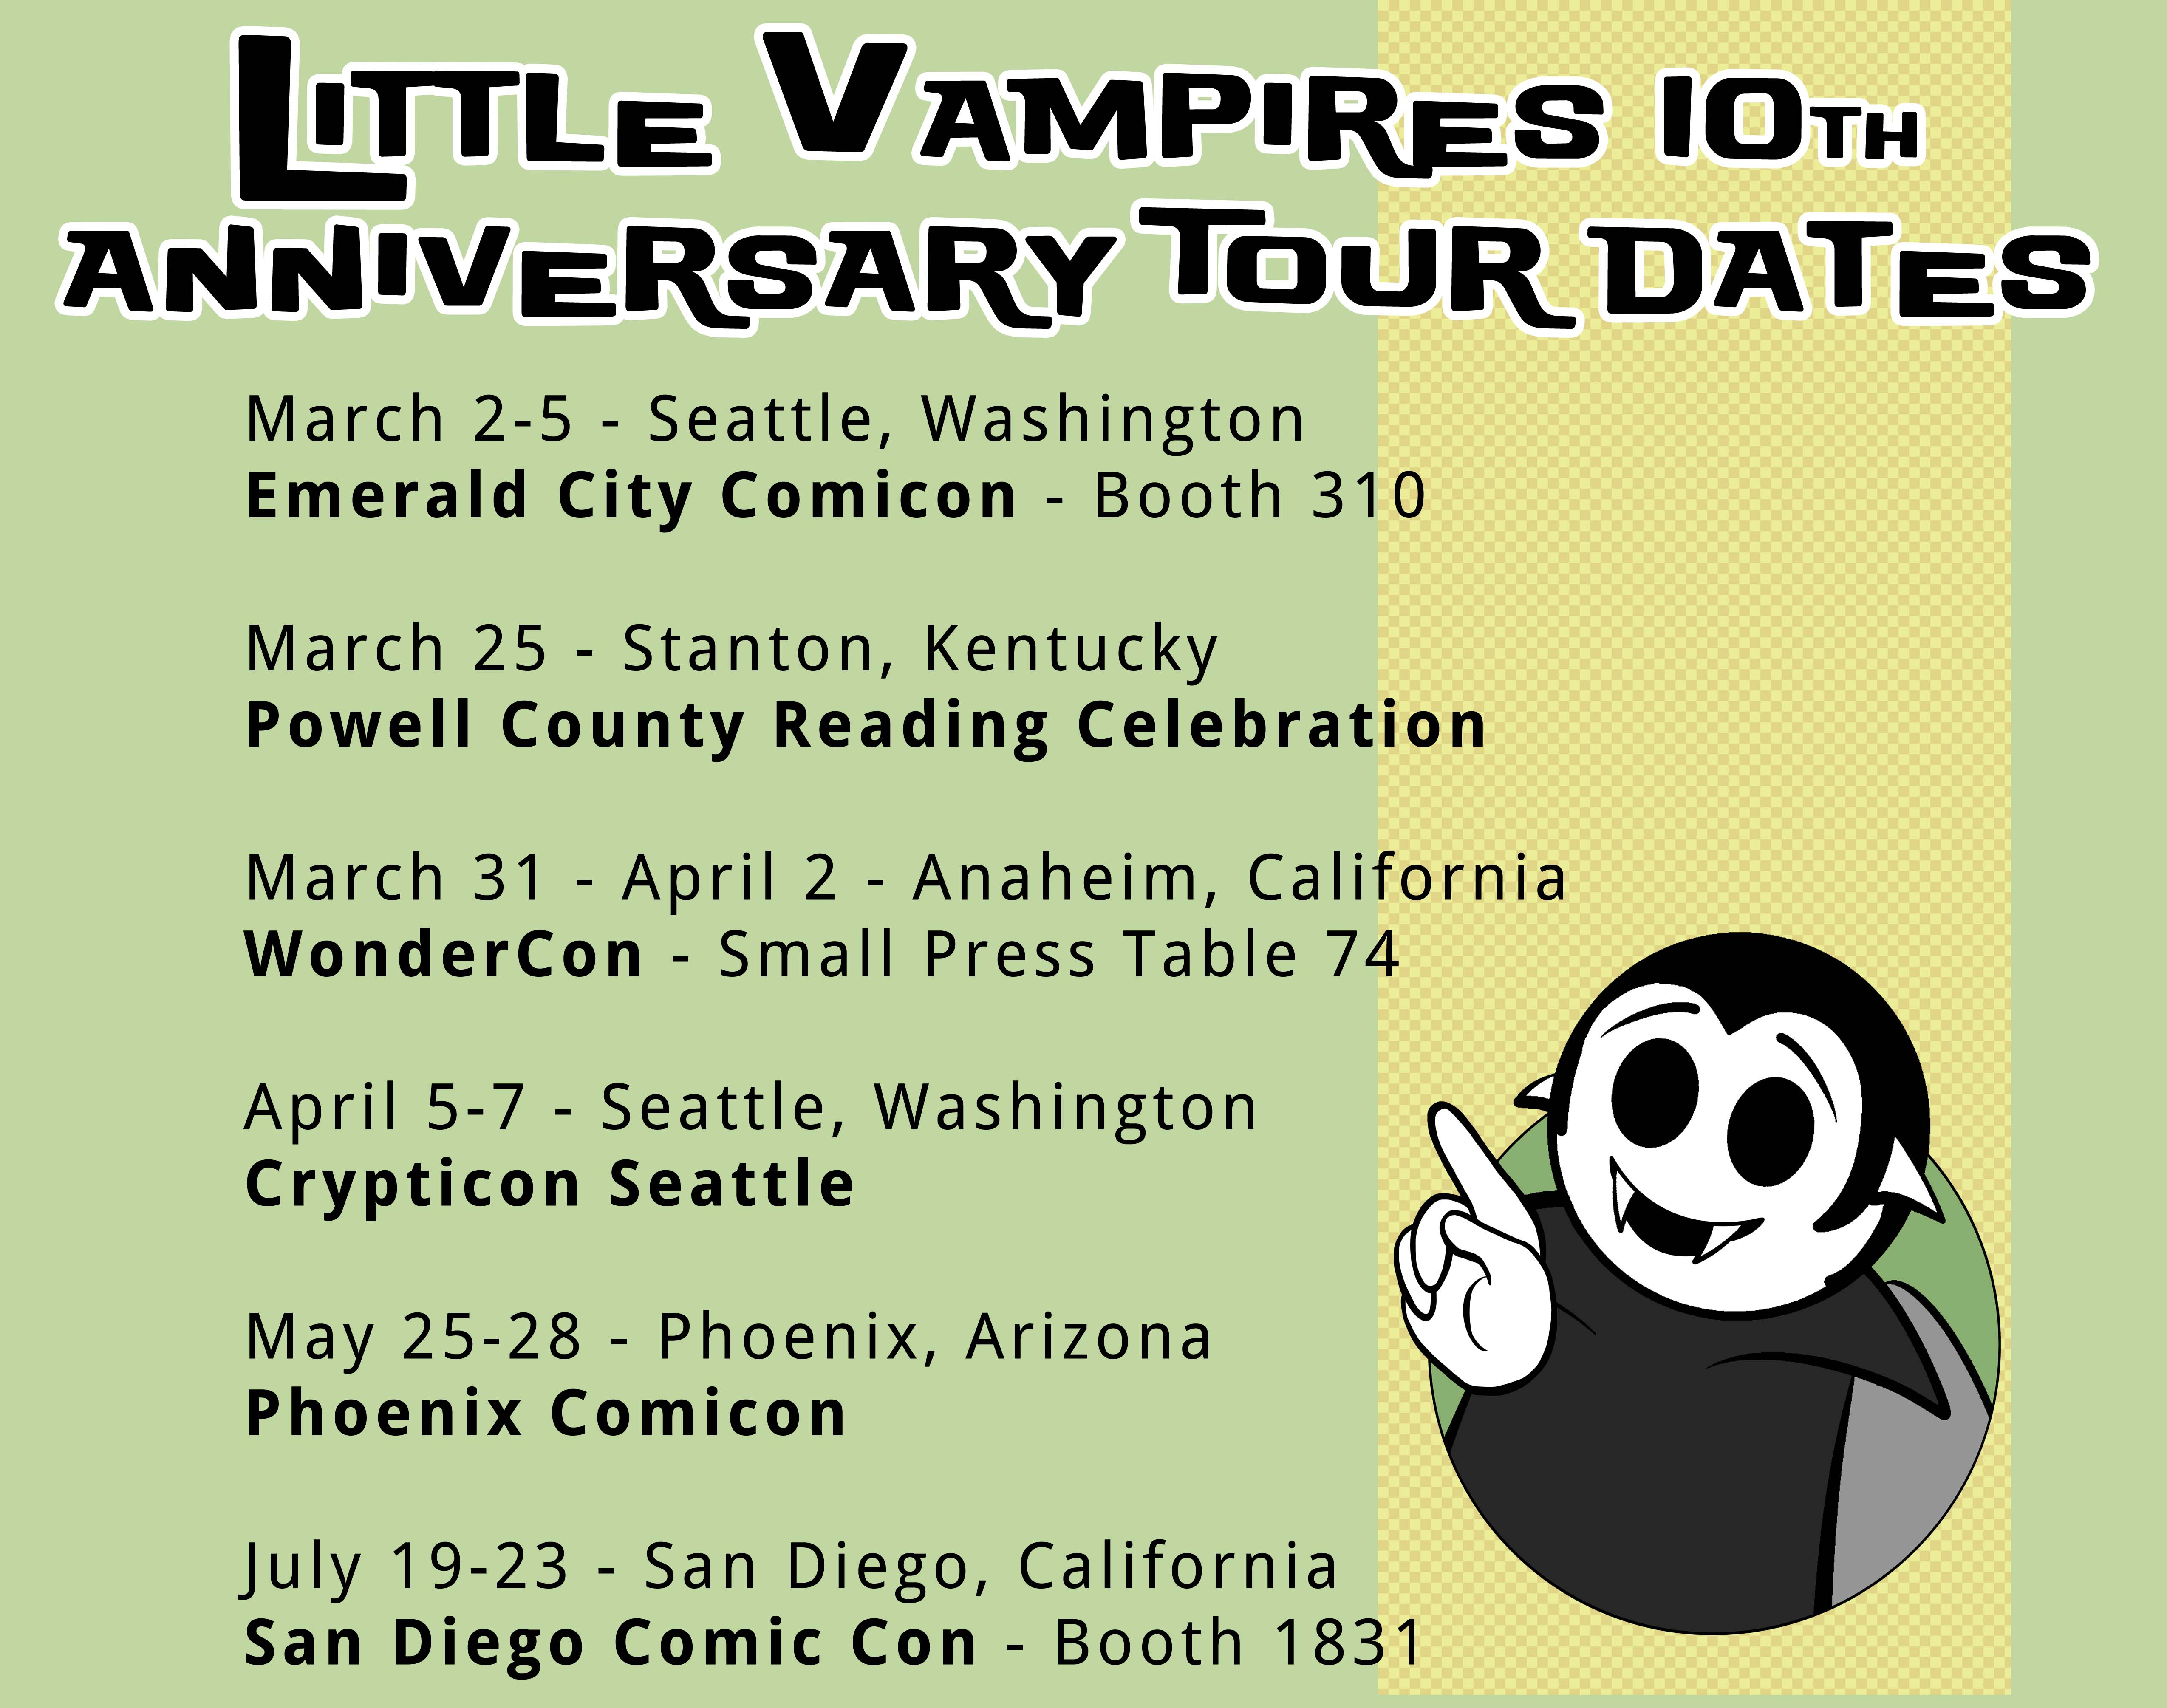 Little Vampires 10th Anniversary Tour promotional image